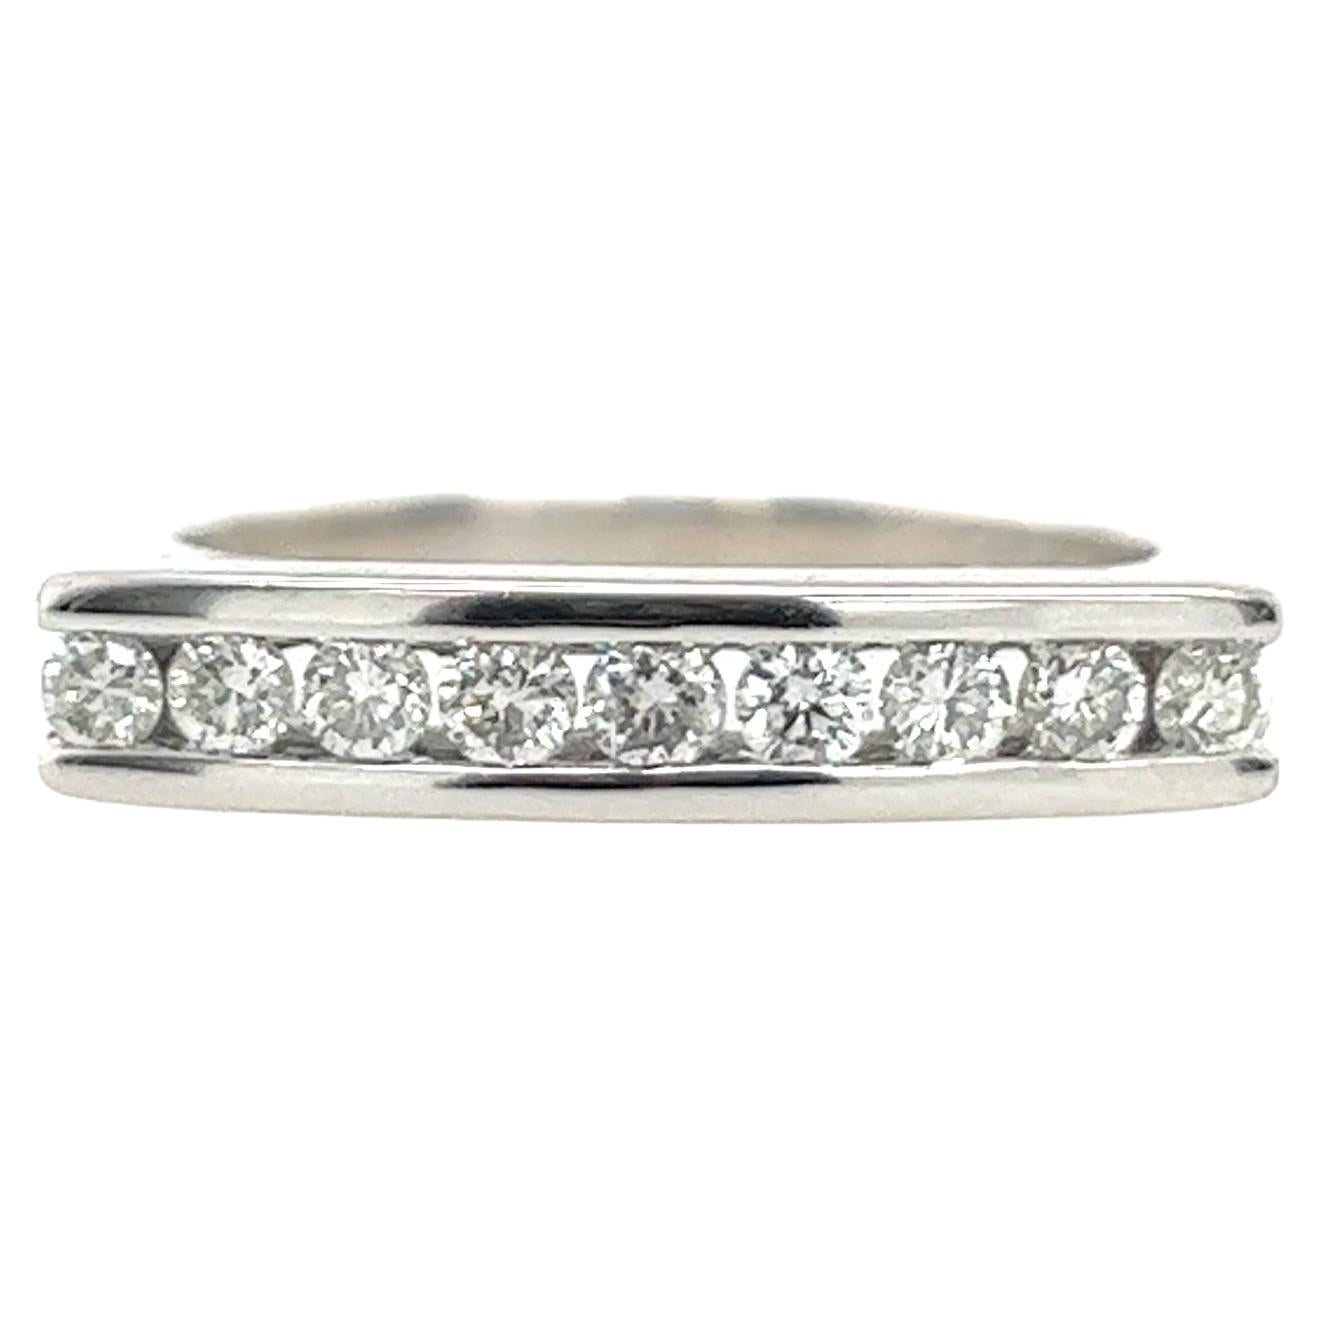 18ct White Gold Diamond Ring, Set With 0.38ct H/SI